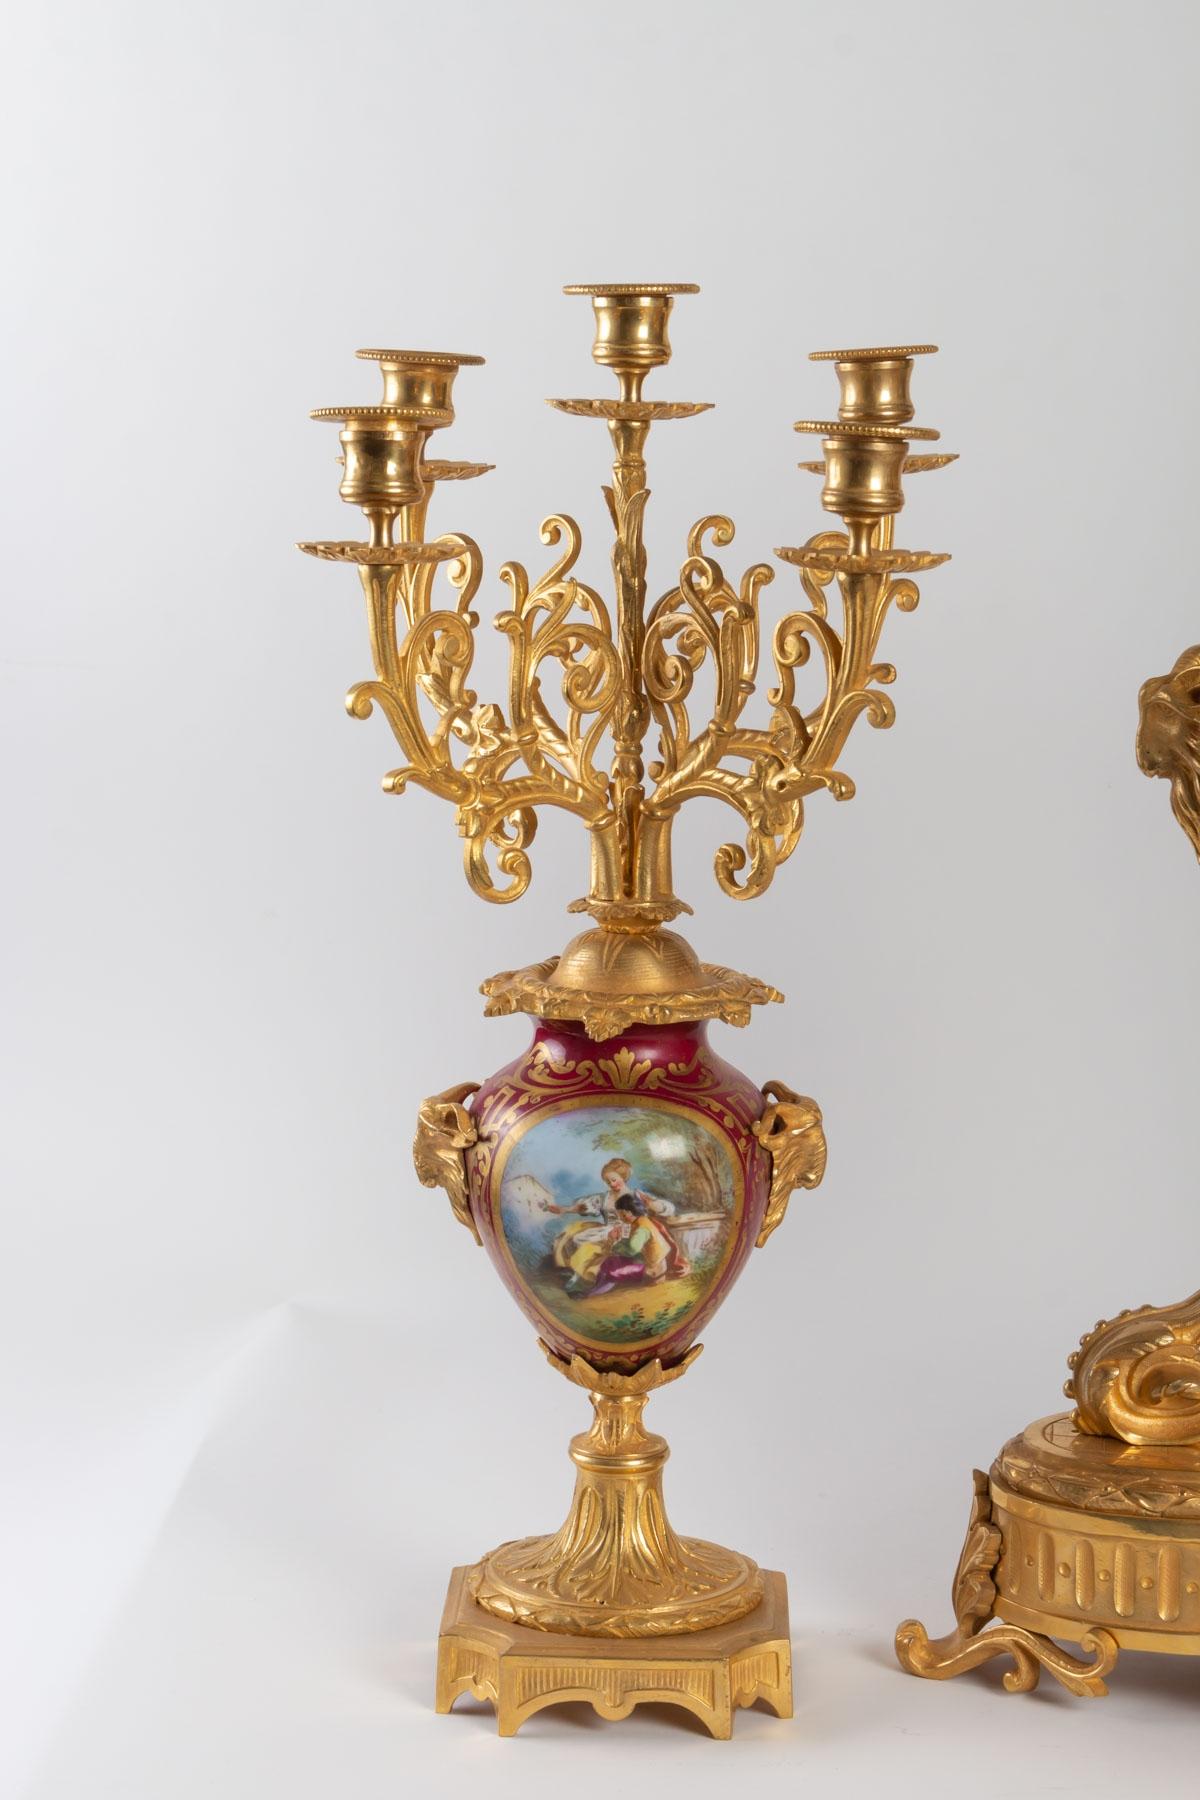 Louis XVI style mantel set in bronze and Sèvres Porcelain, comprising a large clock decorated with two doves, Roman numerals framed by a cherub, two ram's heads on the sides, rich foliated decoration on the base.
Late 19th century period, Napoleon